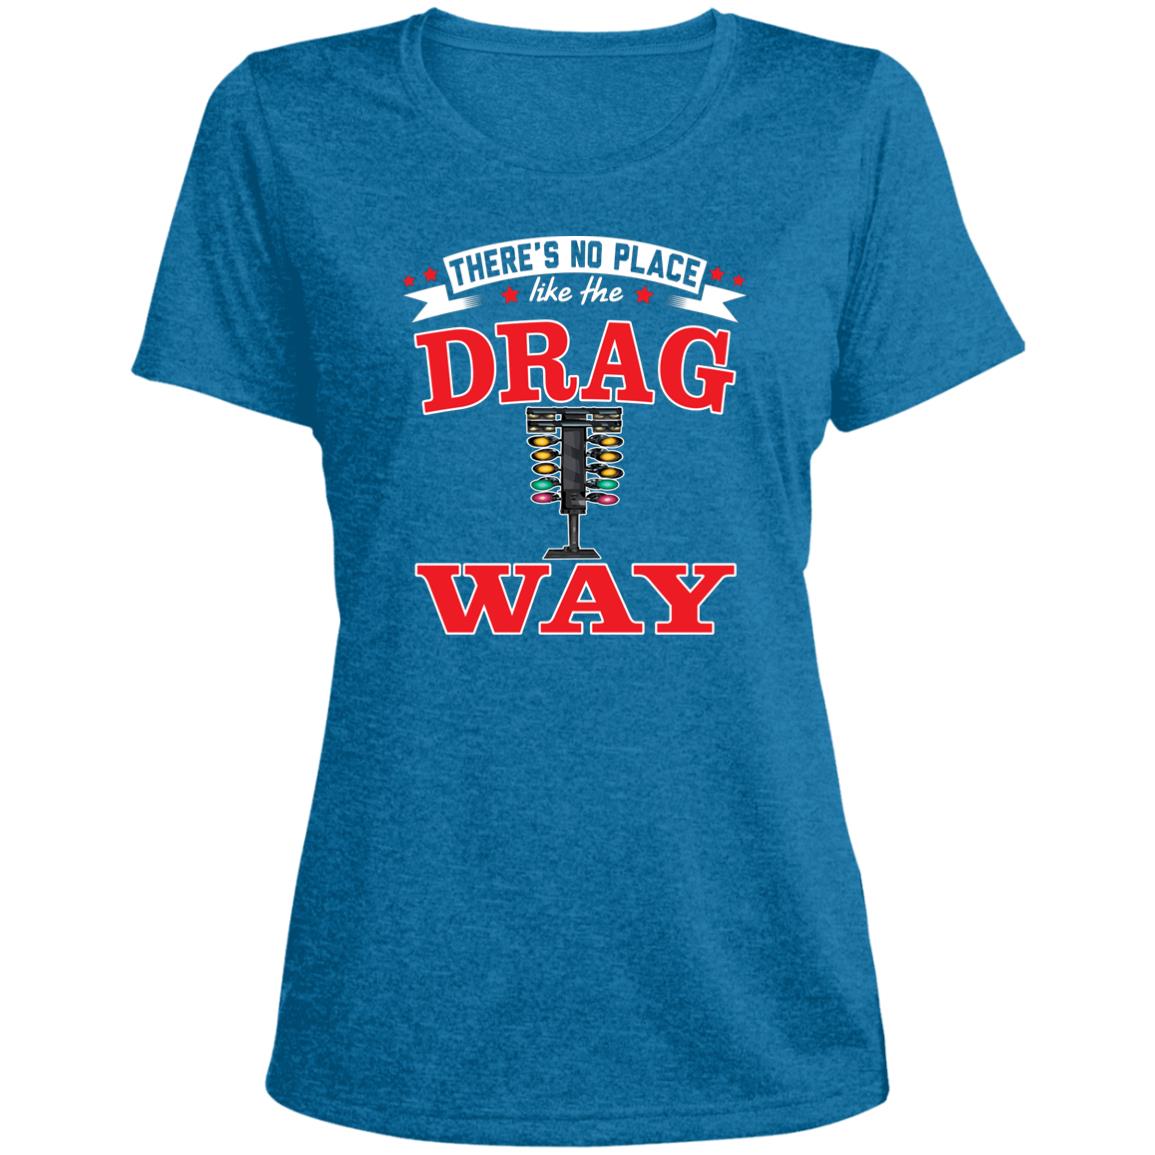 There's No Place Like The Dragway Ladies' Heather Scoop Neck Performance Tee